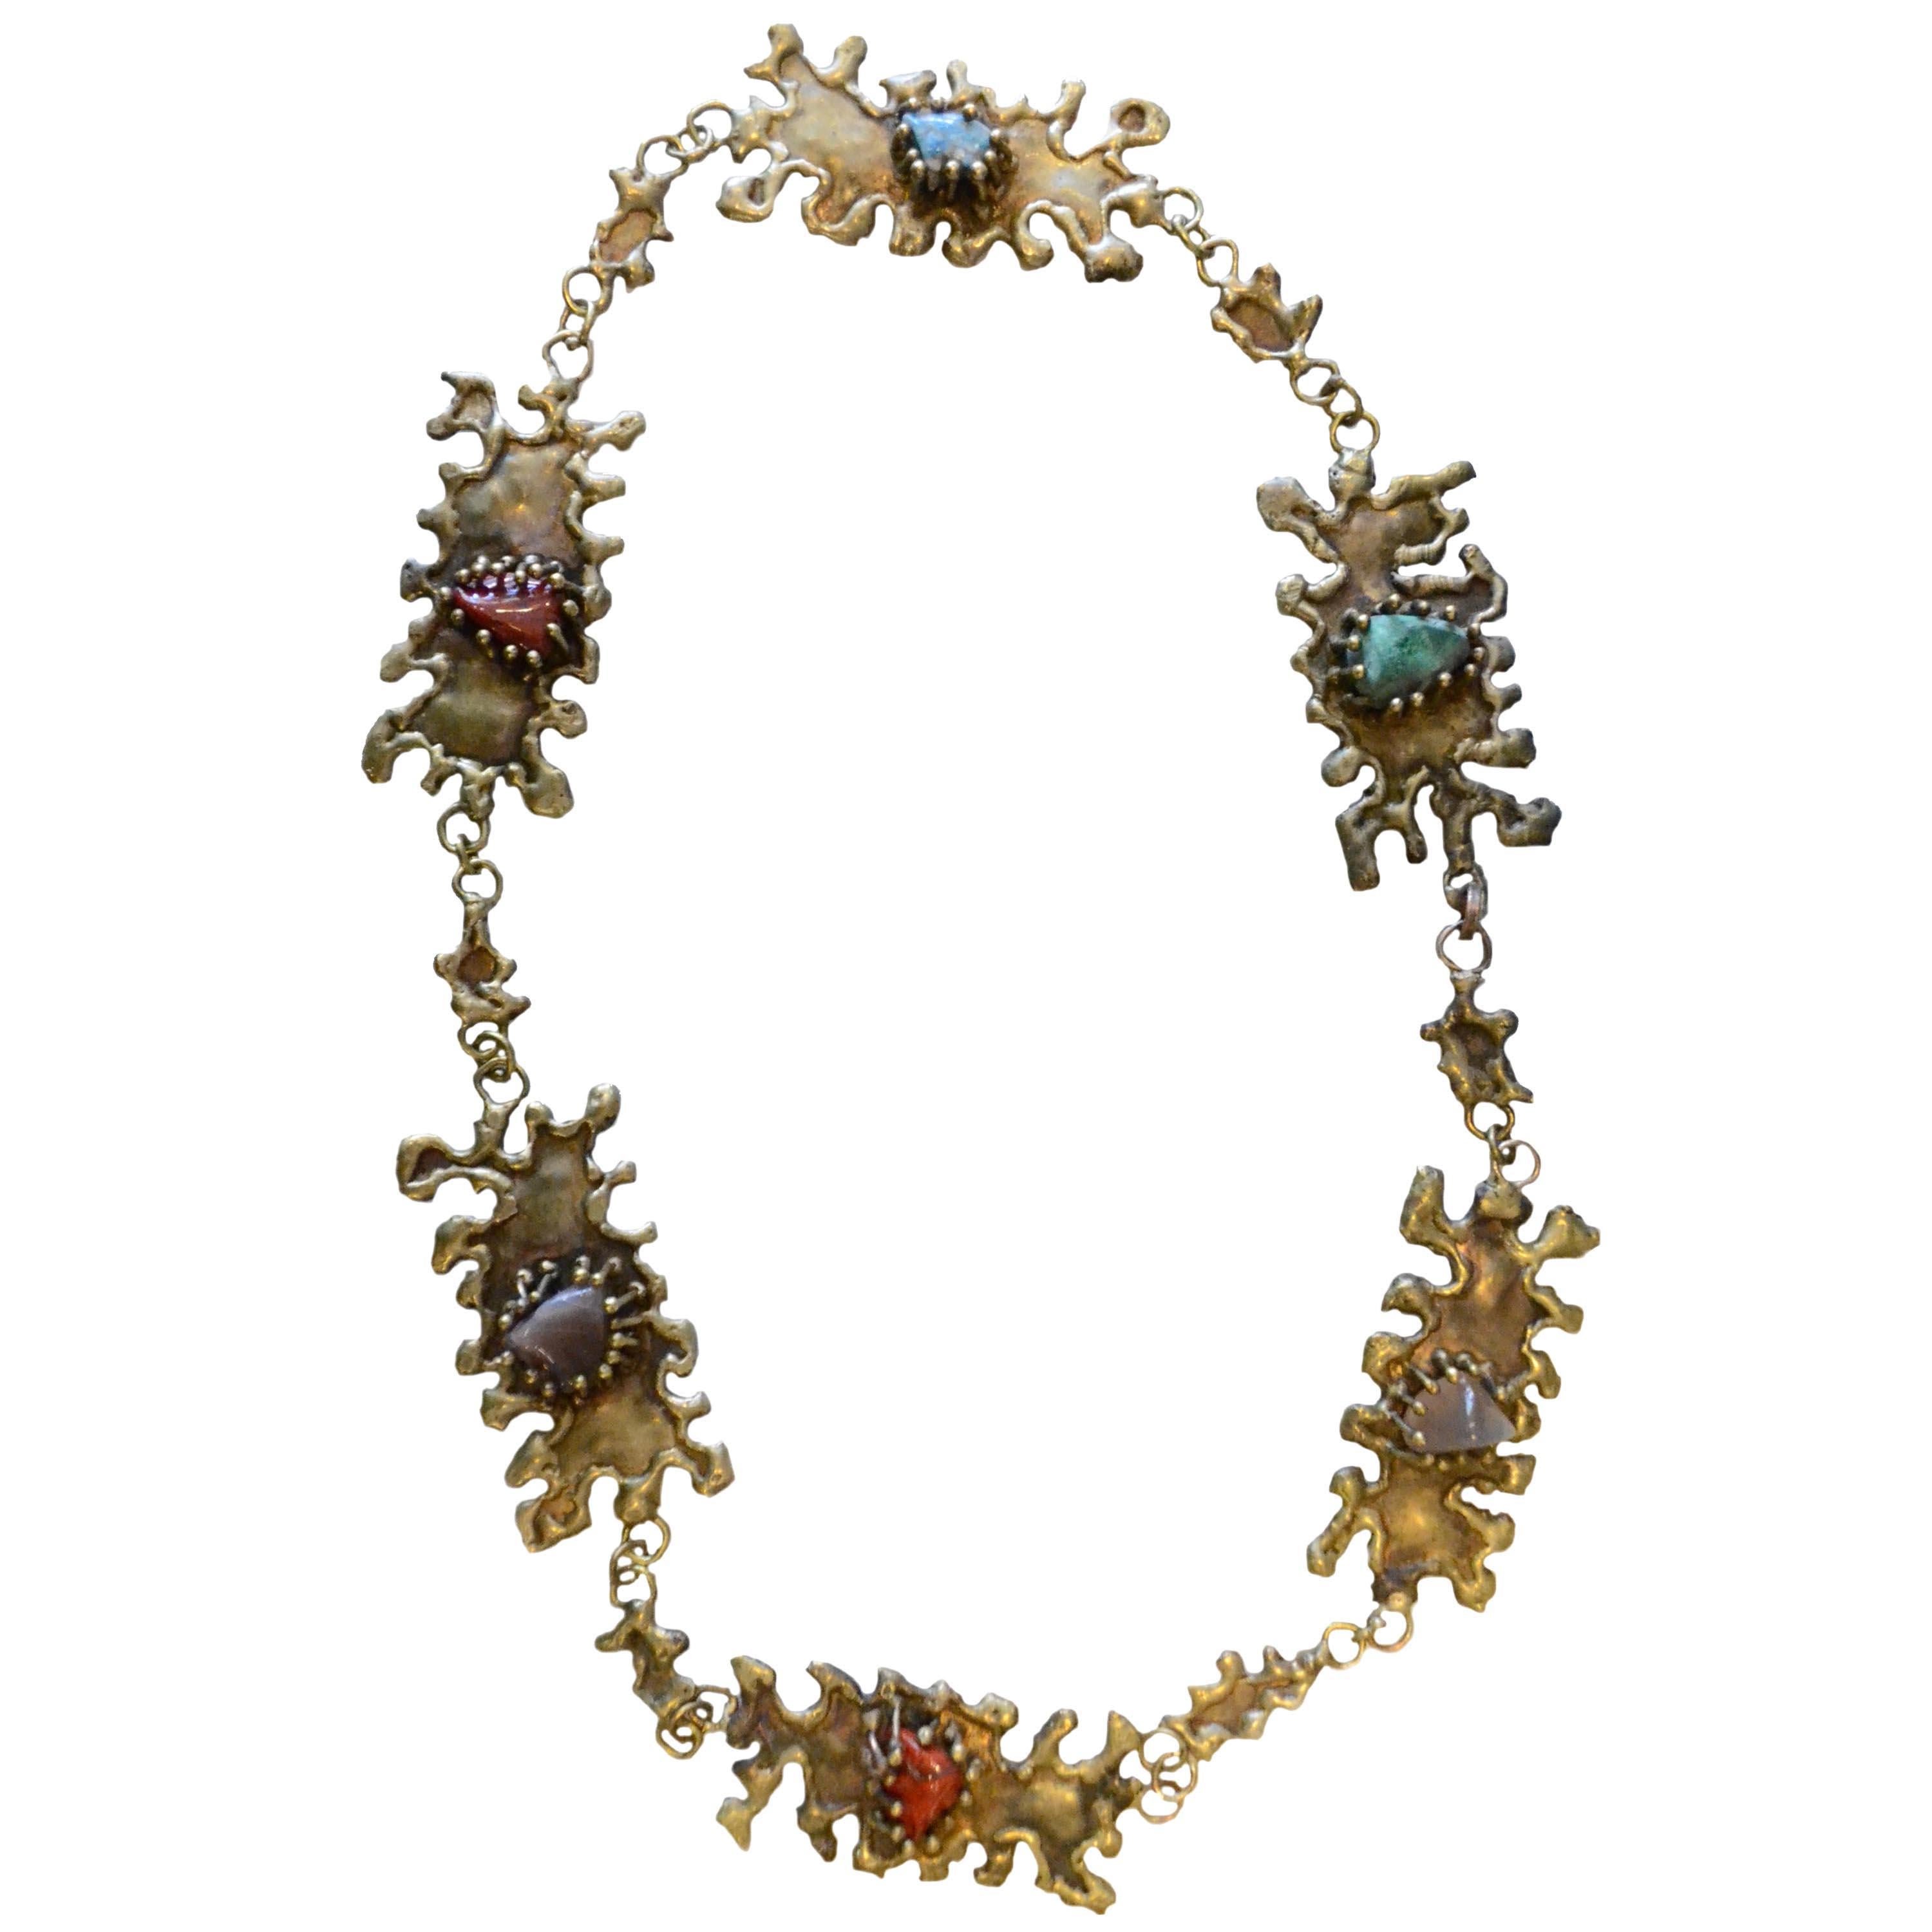 A gorgeous Brutalist bronze necklace with semiprecious stones by Pal Kepenyes. The necklace with 6 organic-shaped medals and 6 irregular semiprecious stones set by needle-shaped claws. Sealed in the back of one of the medals.

Chain's length: 82